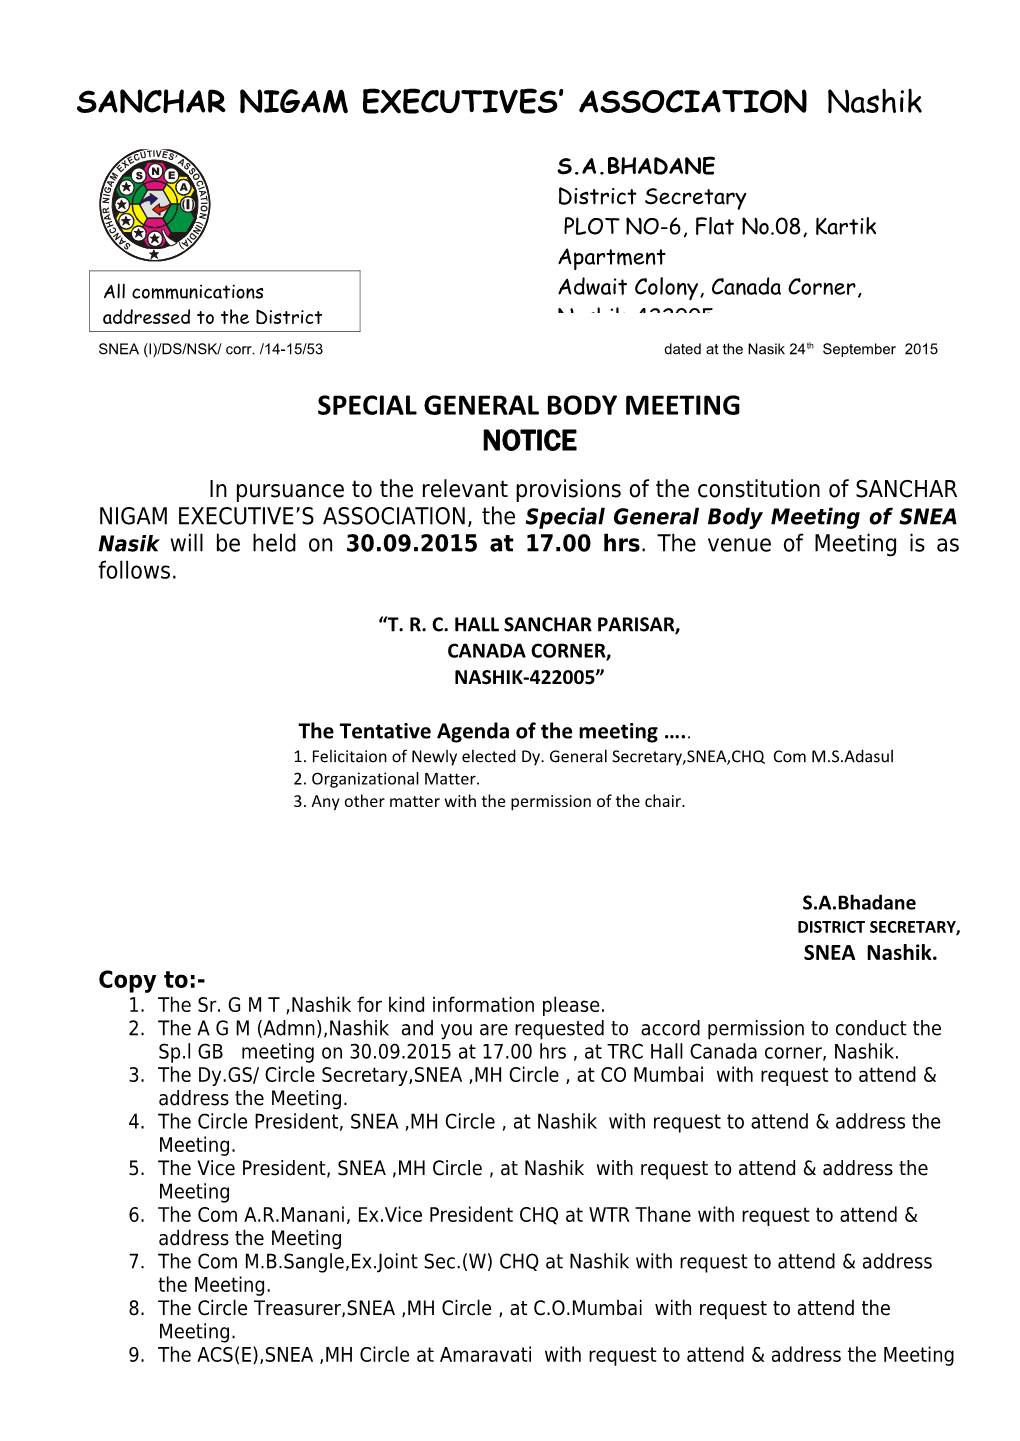 Special General Body Meeting